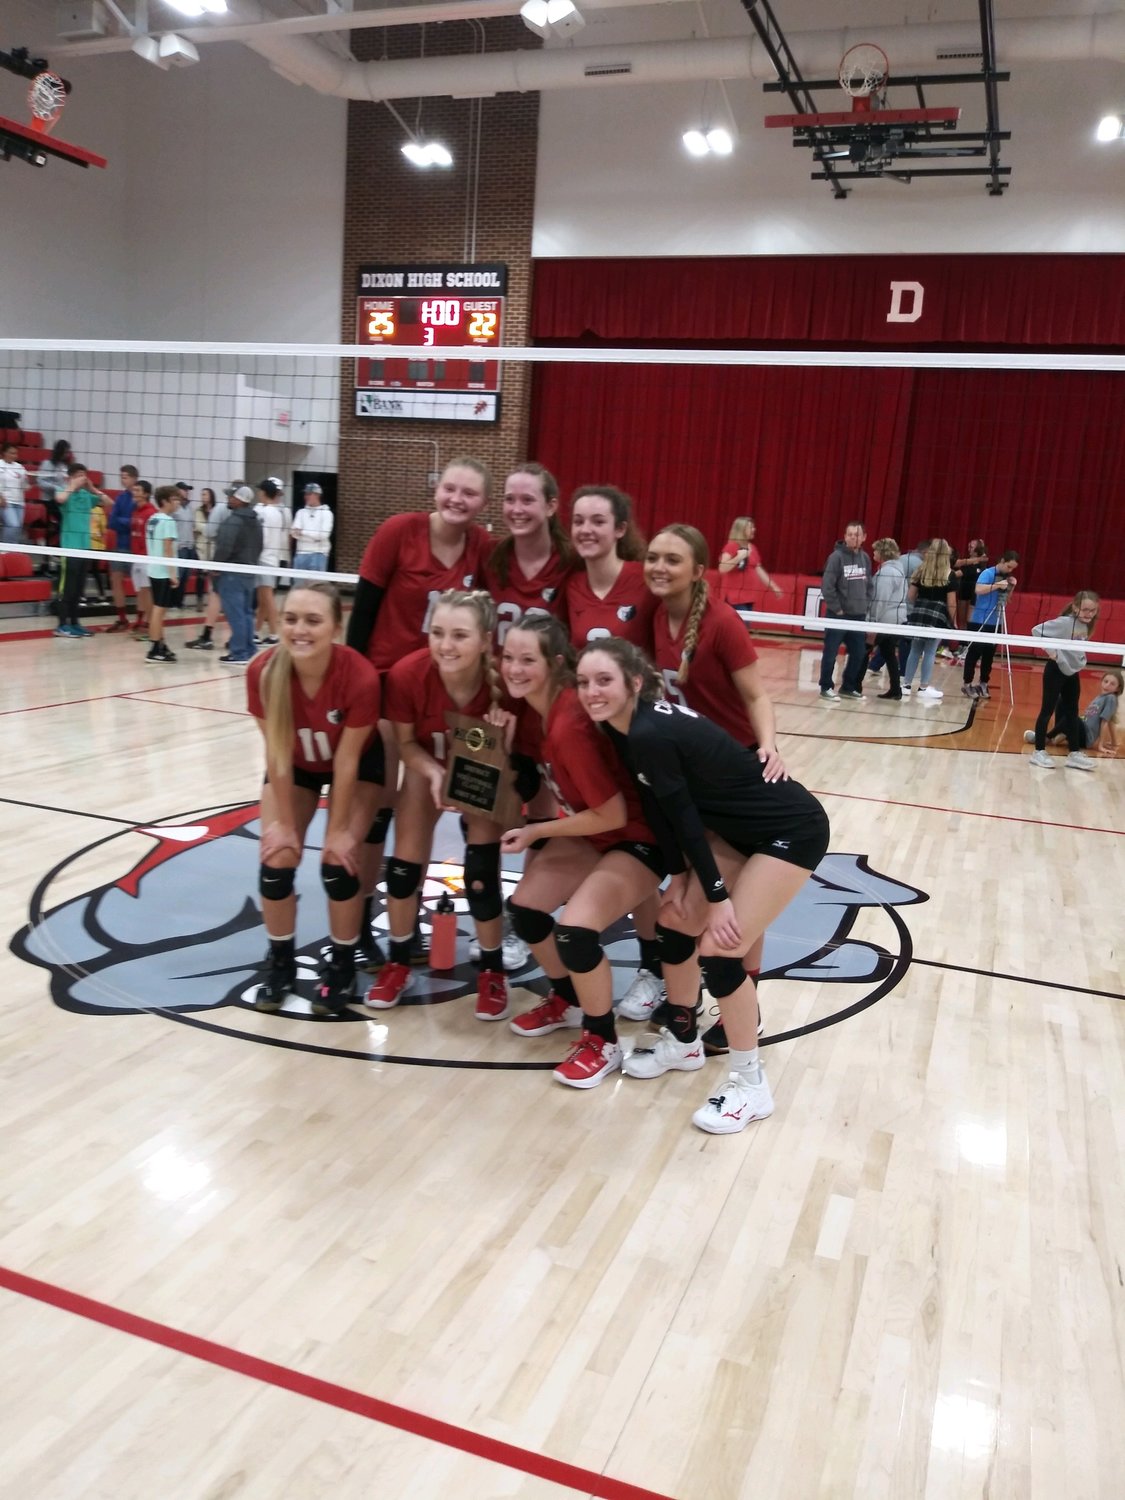 Conway’s varsity volleyball team. (Back row pictured left to right) Gibby Beckler, Breanna Thompson, Lauren Wissbaum and Jamison Cromer, (Front row pictured left to right) Graceson Cromer, Katie Myers, Carlie Stark and Callie Cornelsion.